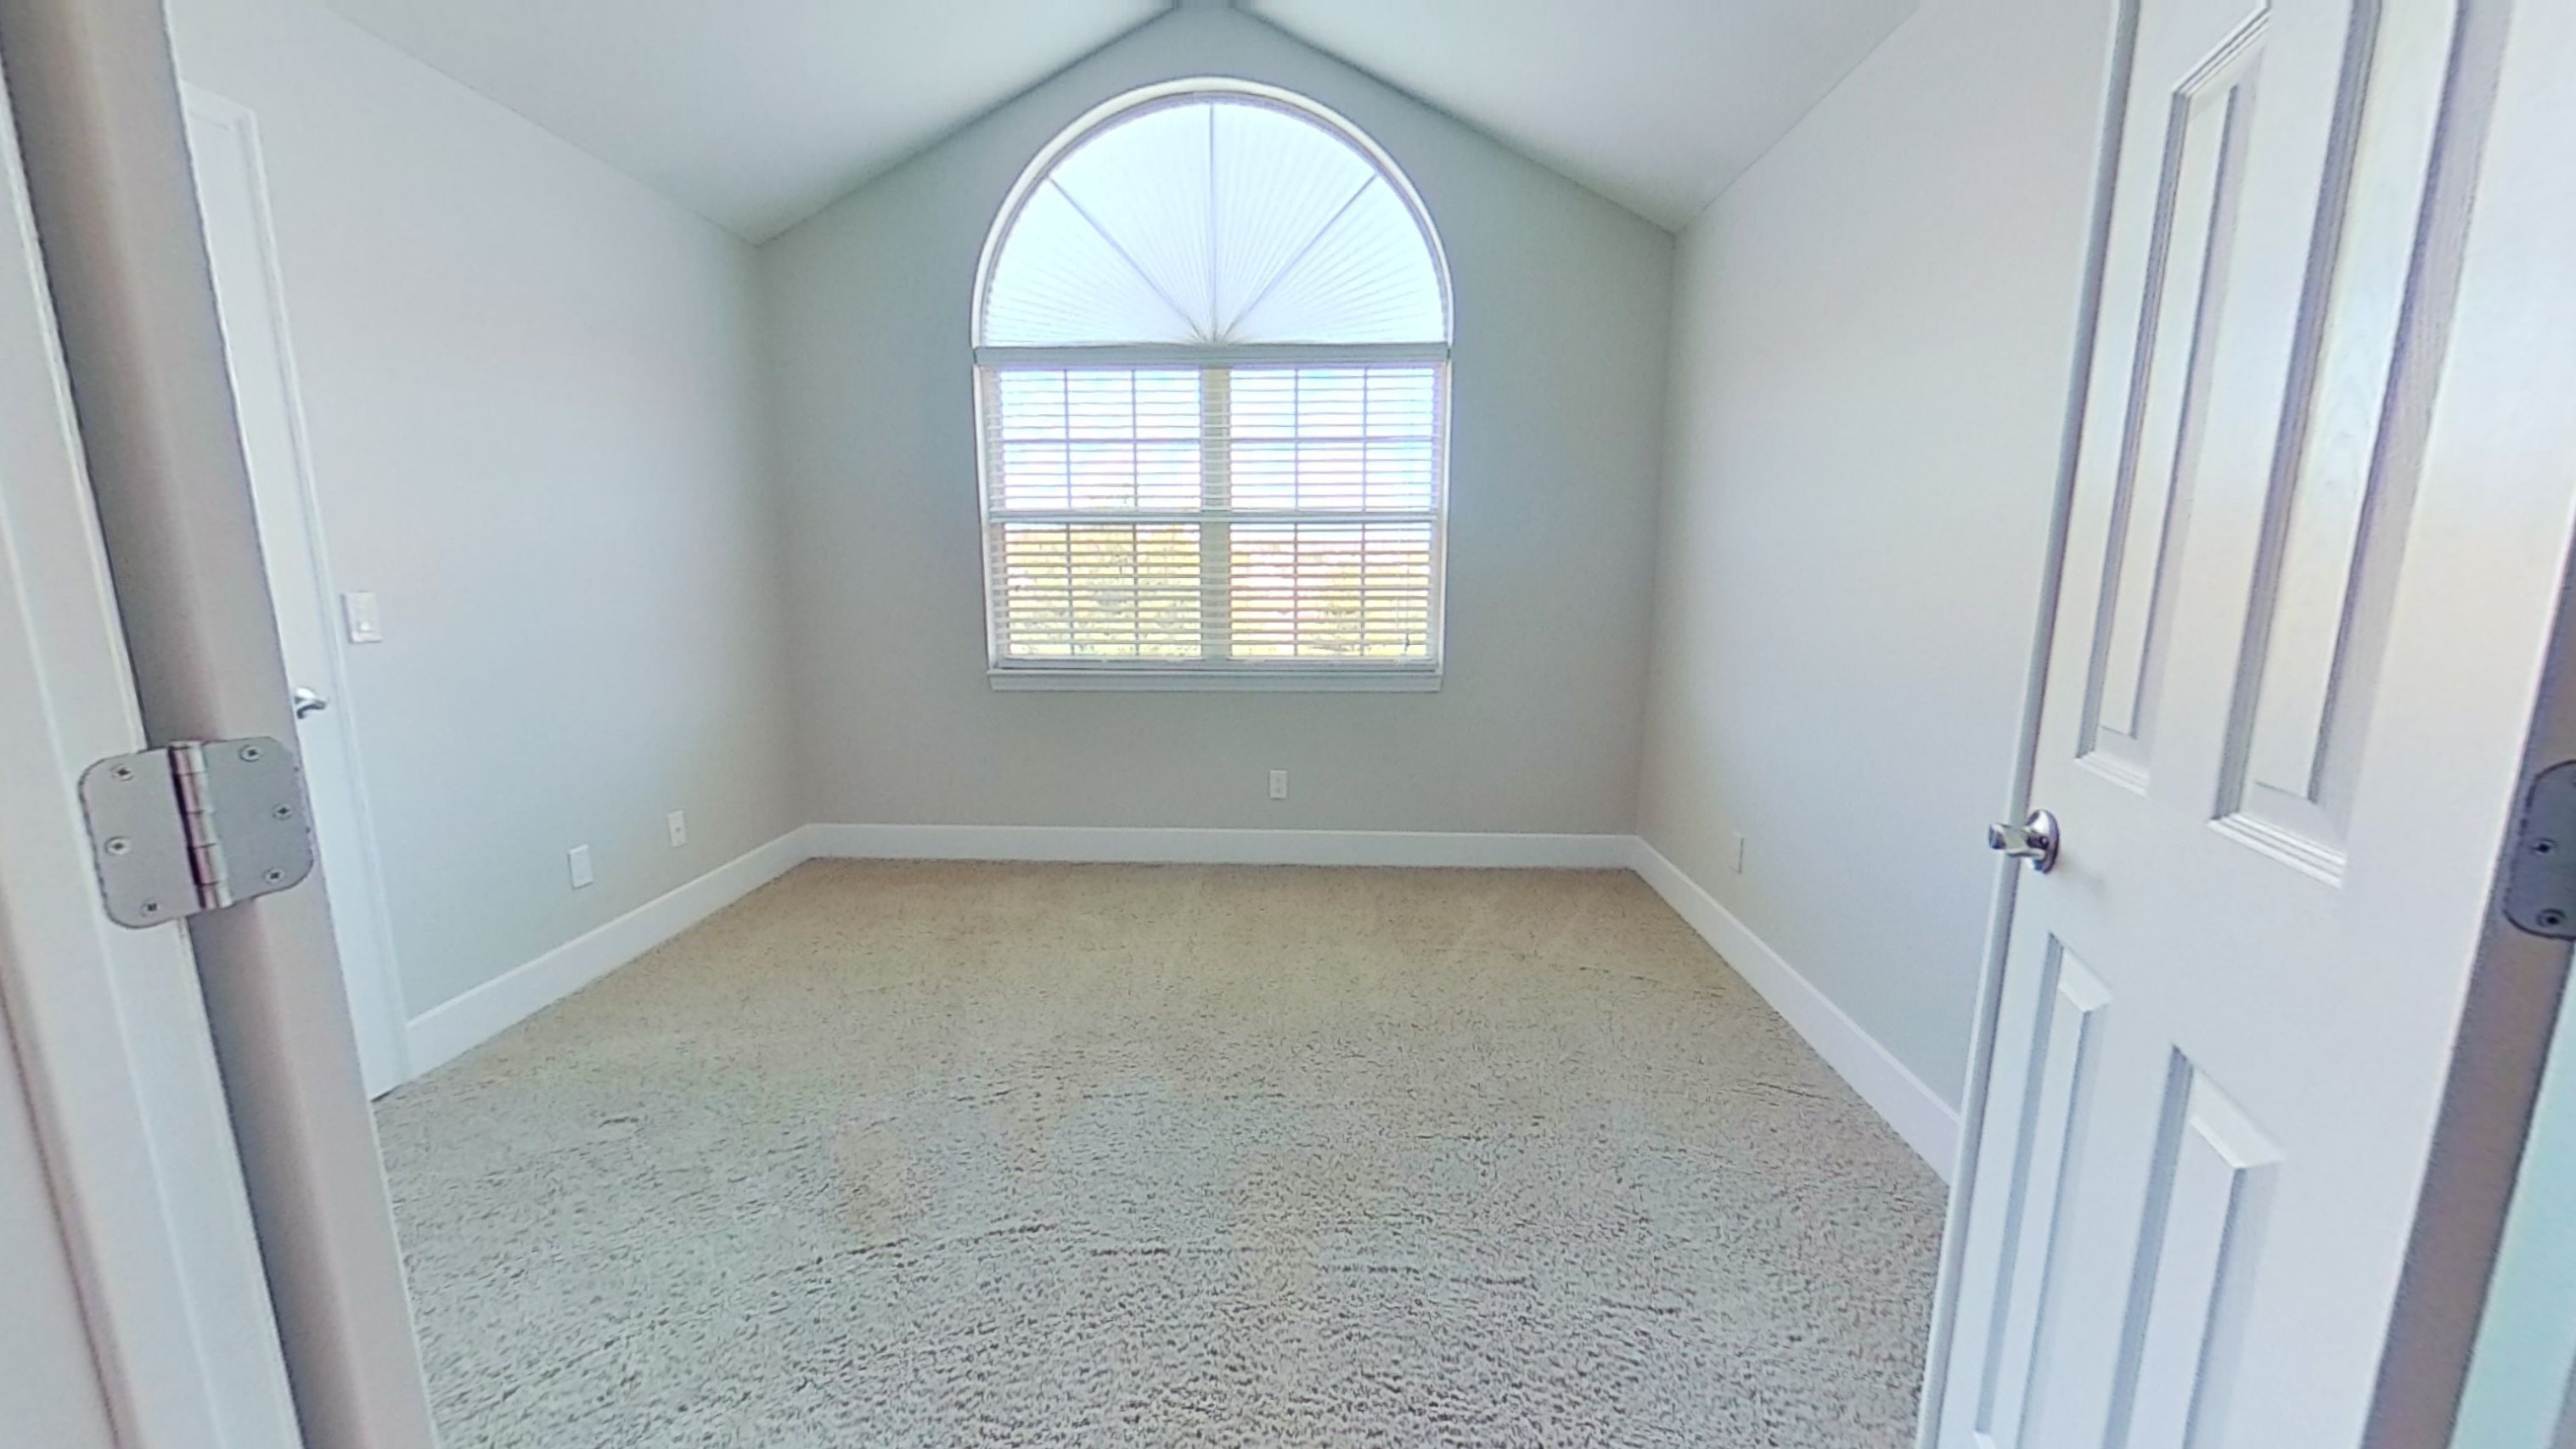 1 bedroom apartment with a den for rent in Fenton MO Cover Photo